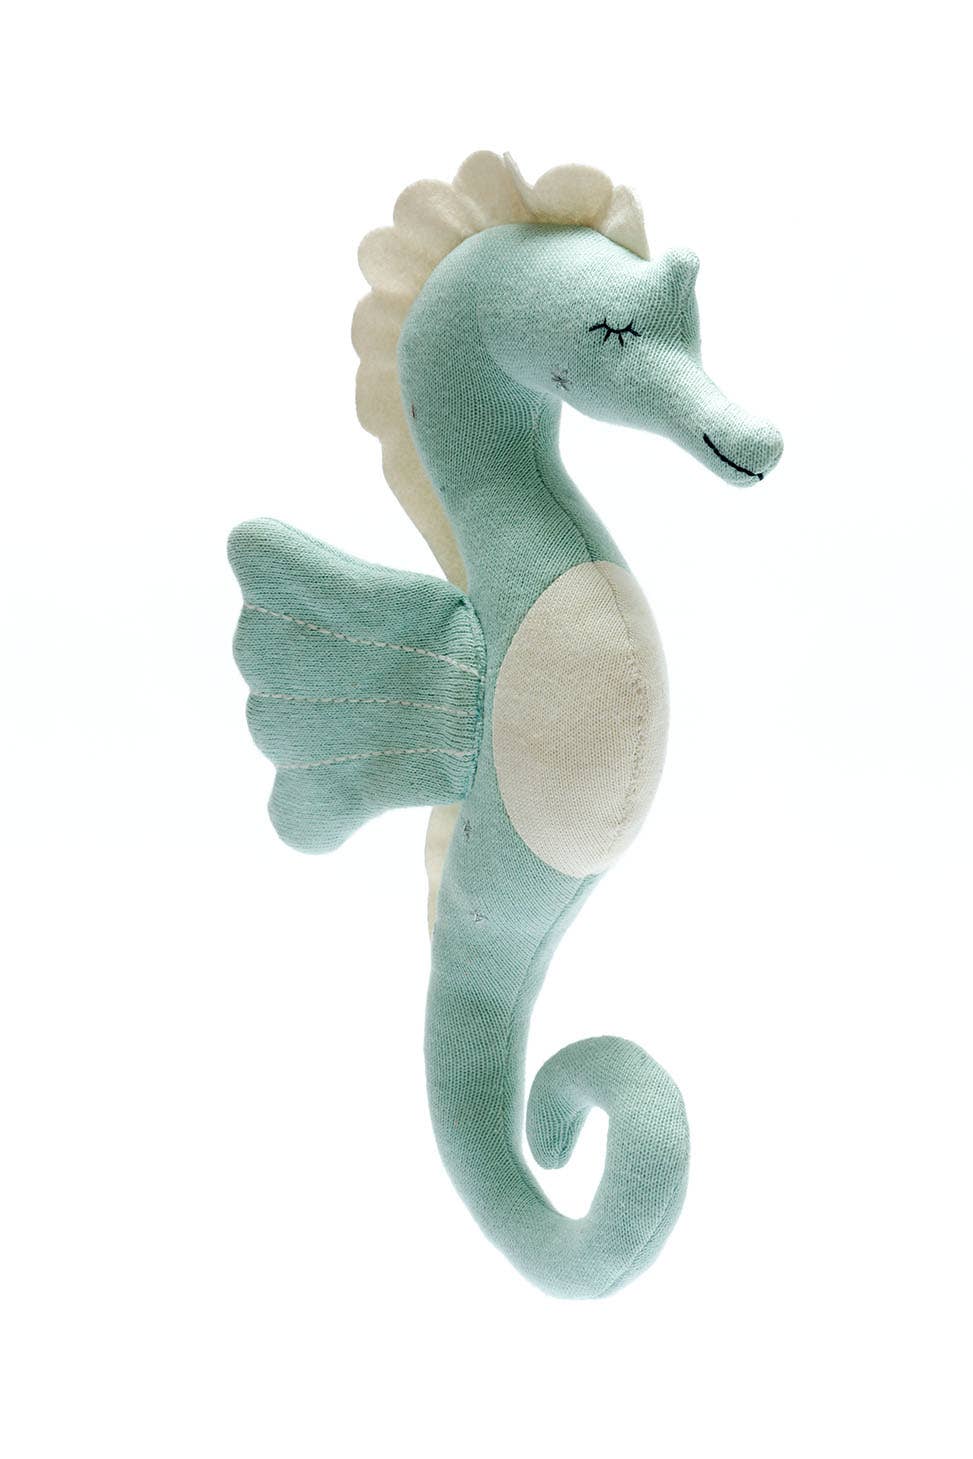 Tactile Knitted Organic Cotton Sea Green Seahorse Plush Toy